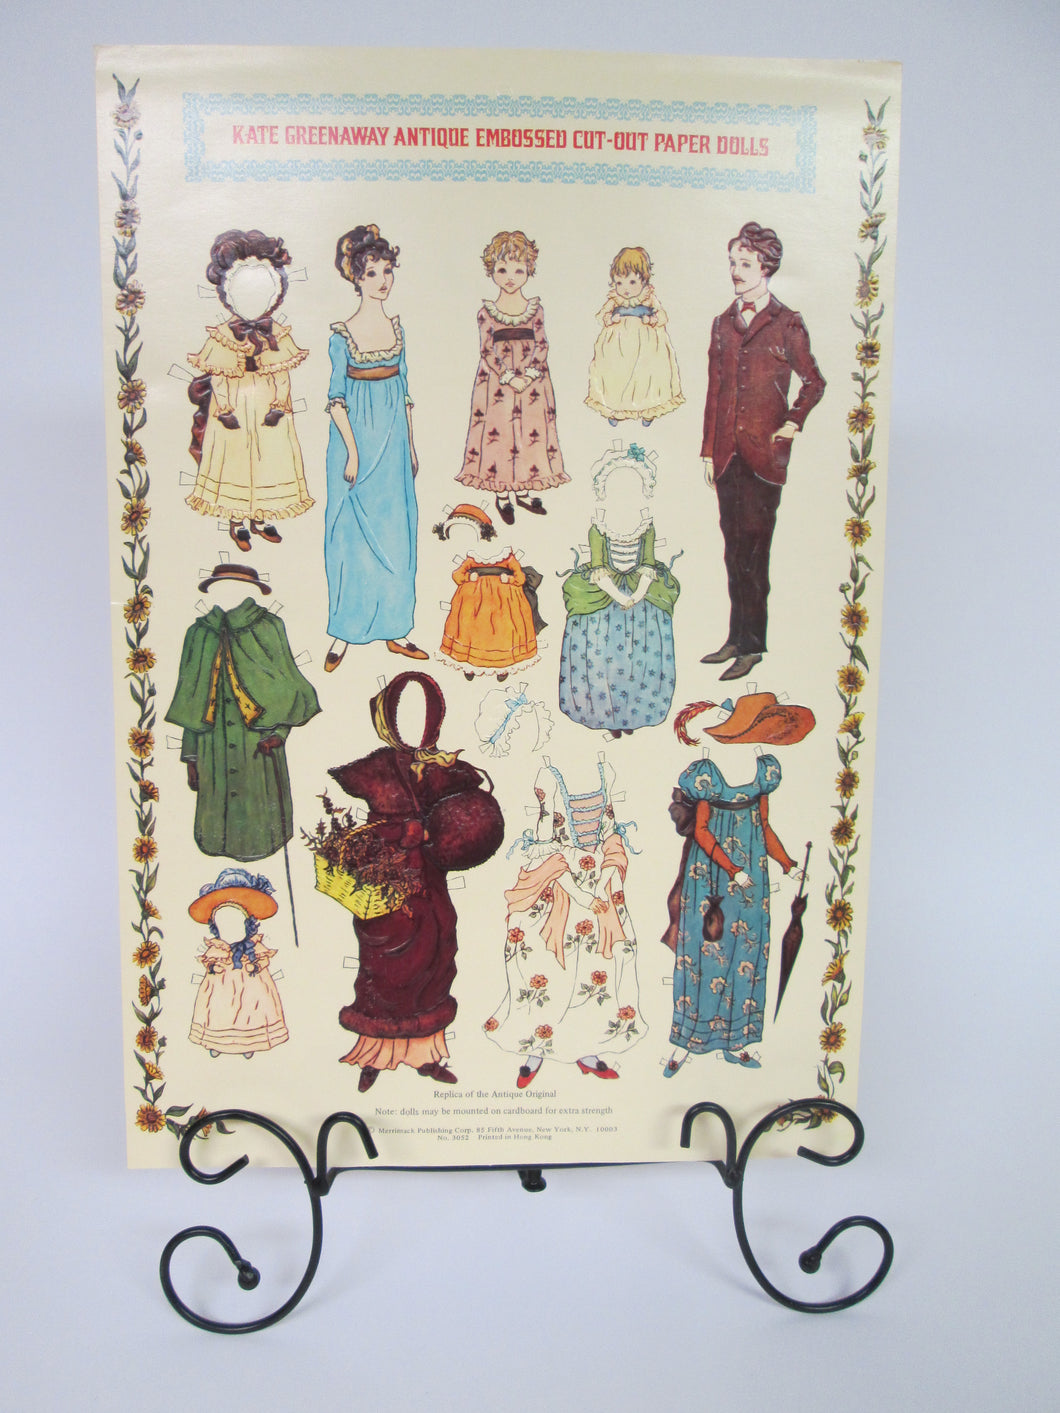 Kate Greenway Antique Embossed Cut-Out Paper Dolls Sheet